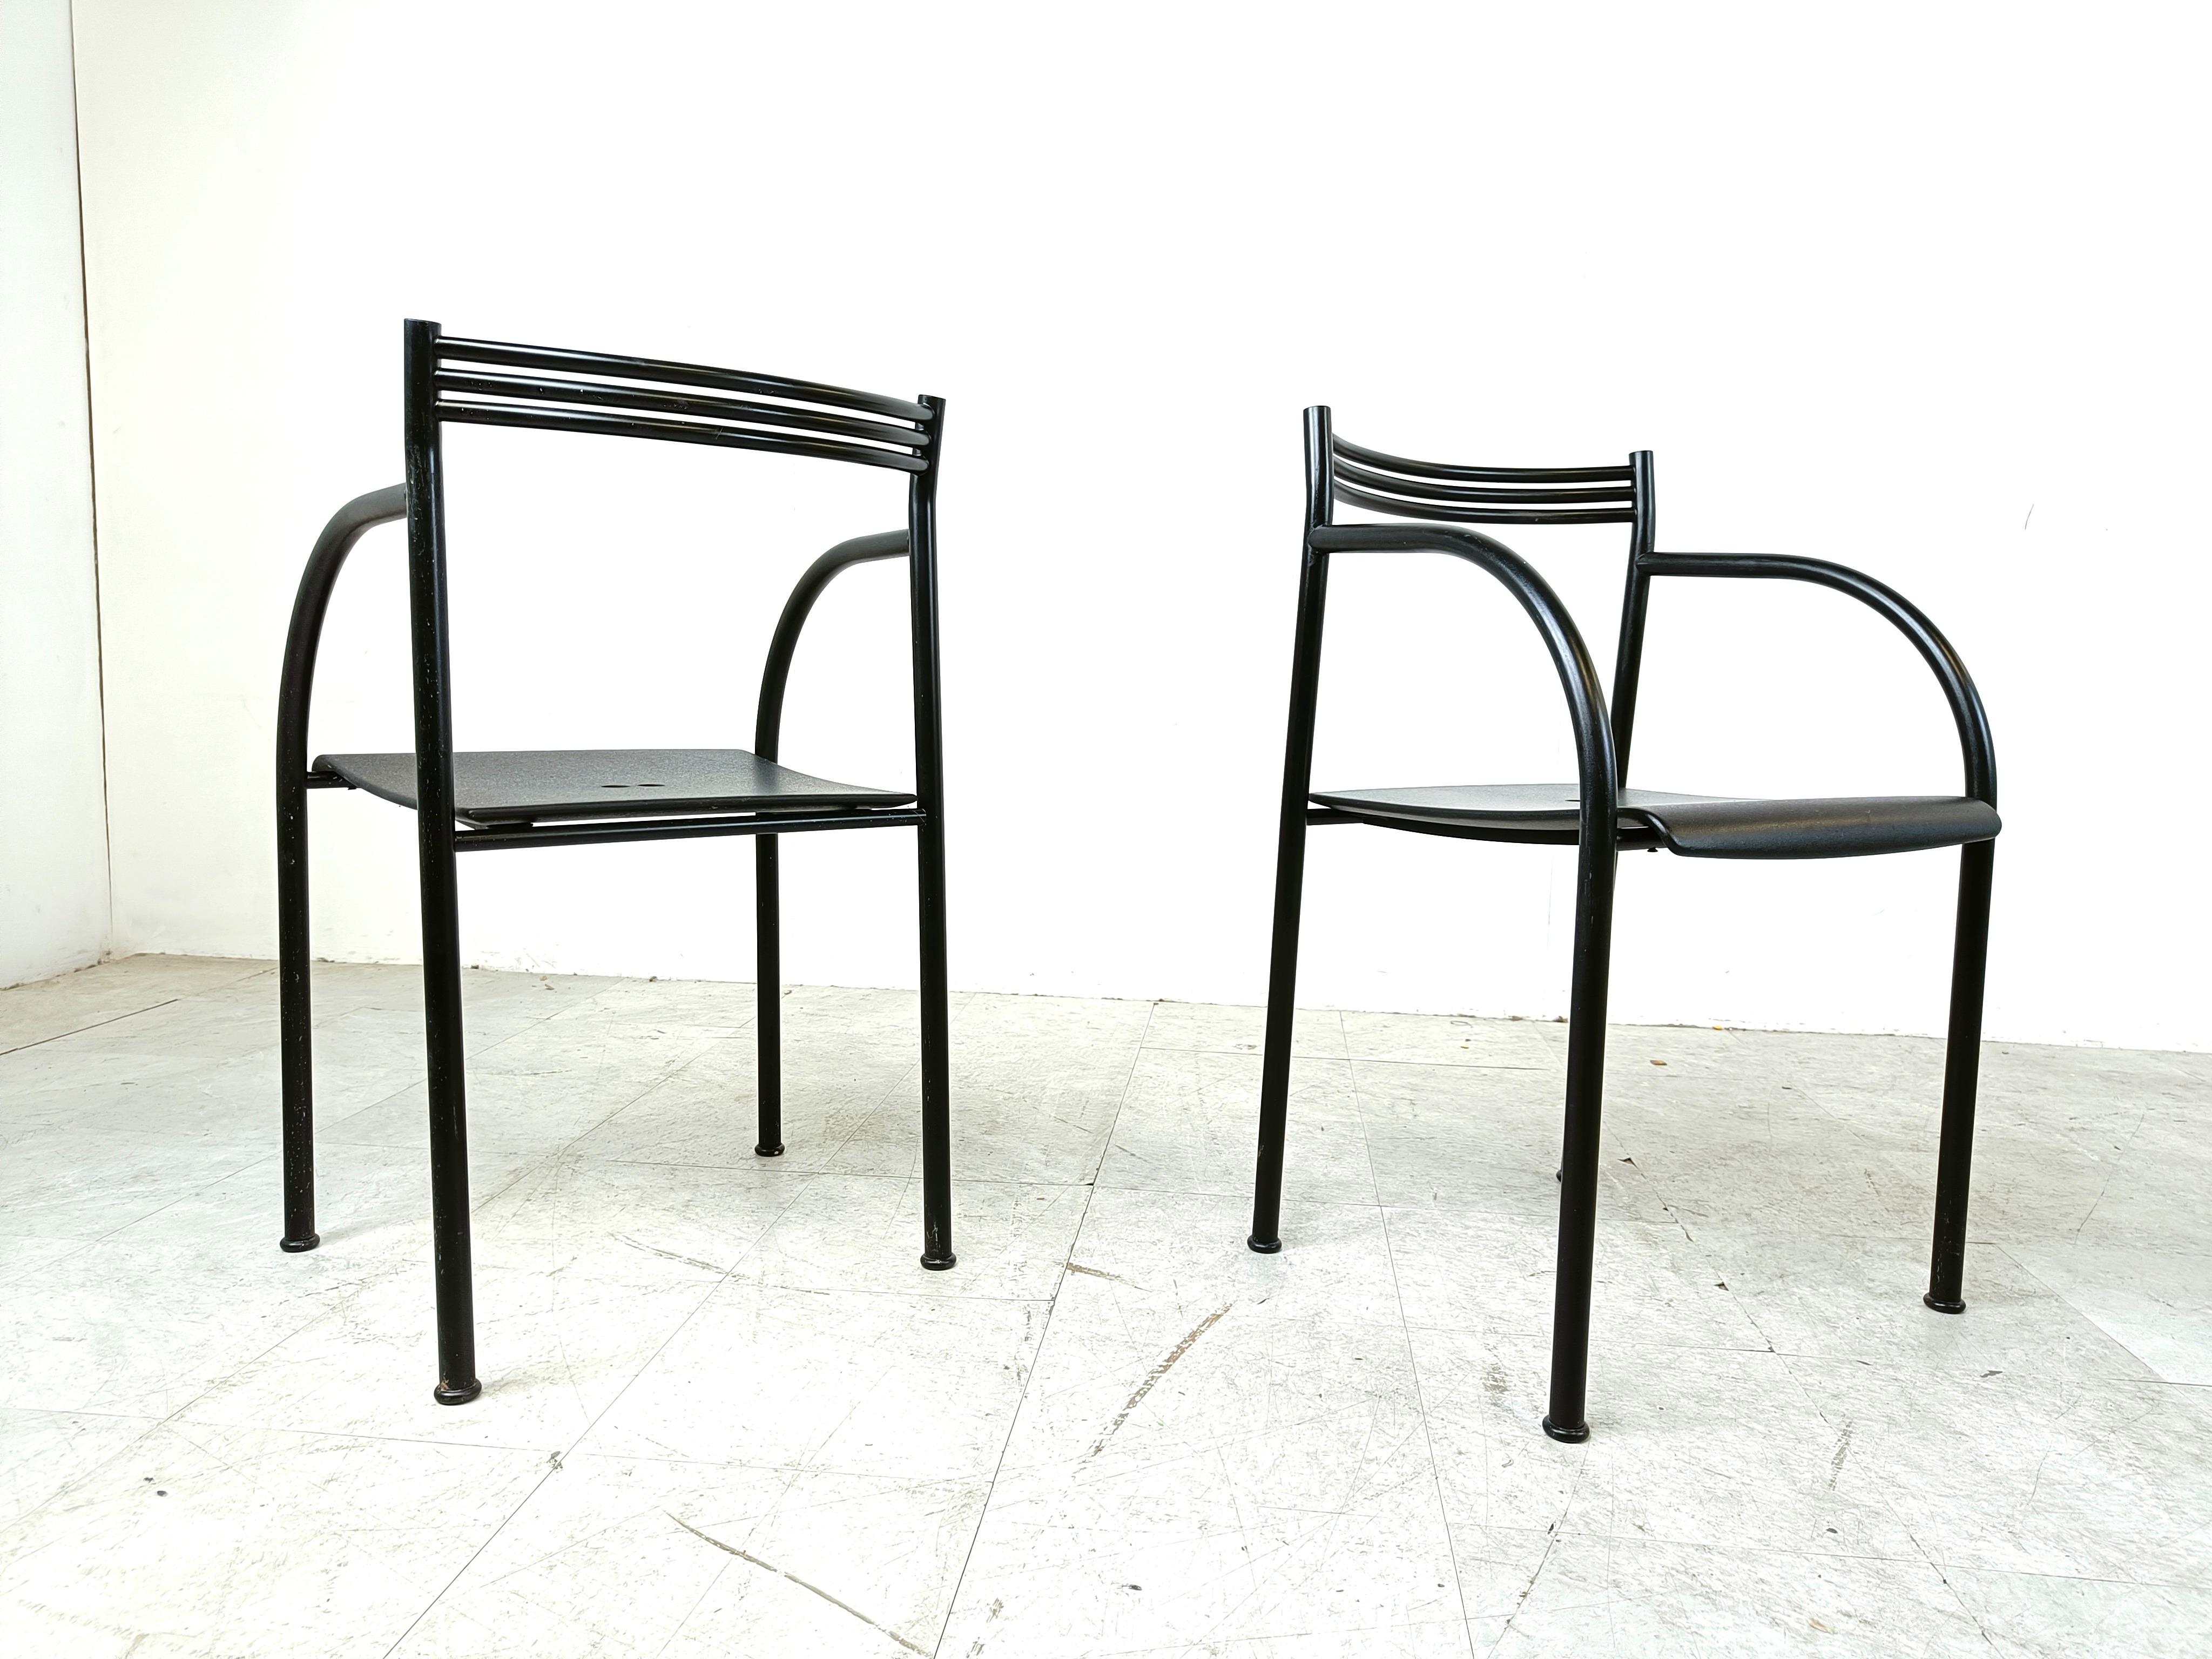 Set of 4 very rare 'Spanish Francesca' armchairs designed by Philippe Starck for Baleri Italia.

They were designed in 1982.

Nice ppost modern design.

Frames made out of black metal with a thin sheat of metal for a seat.

Can be used